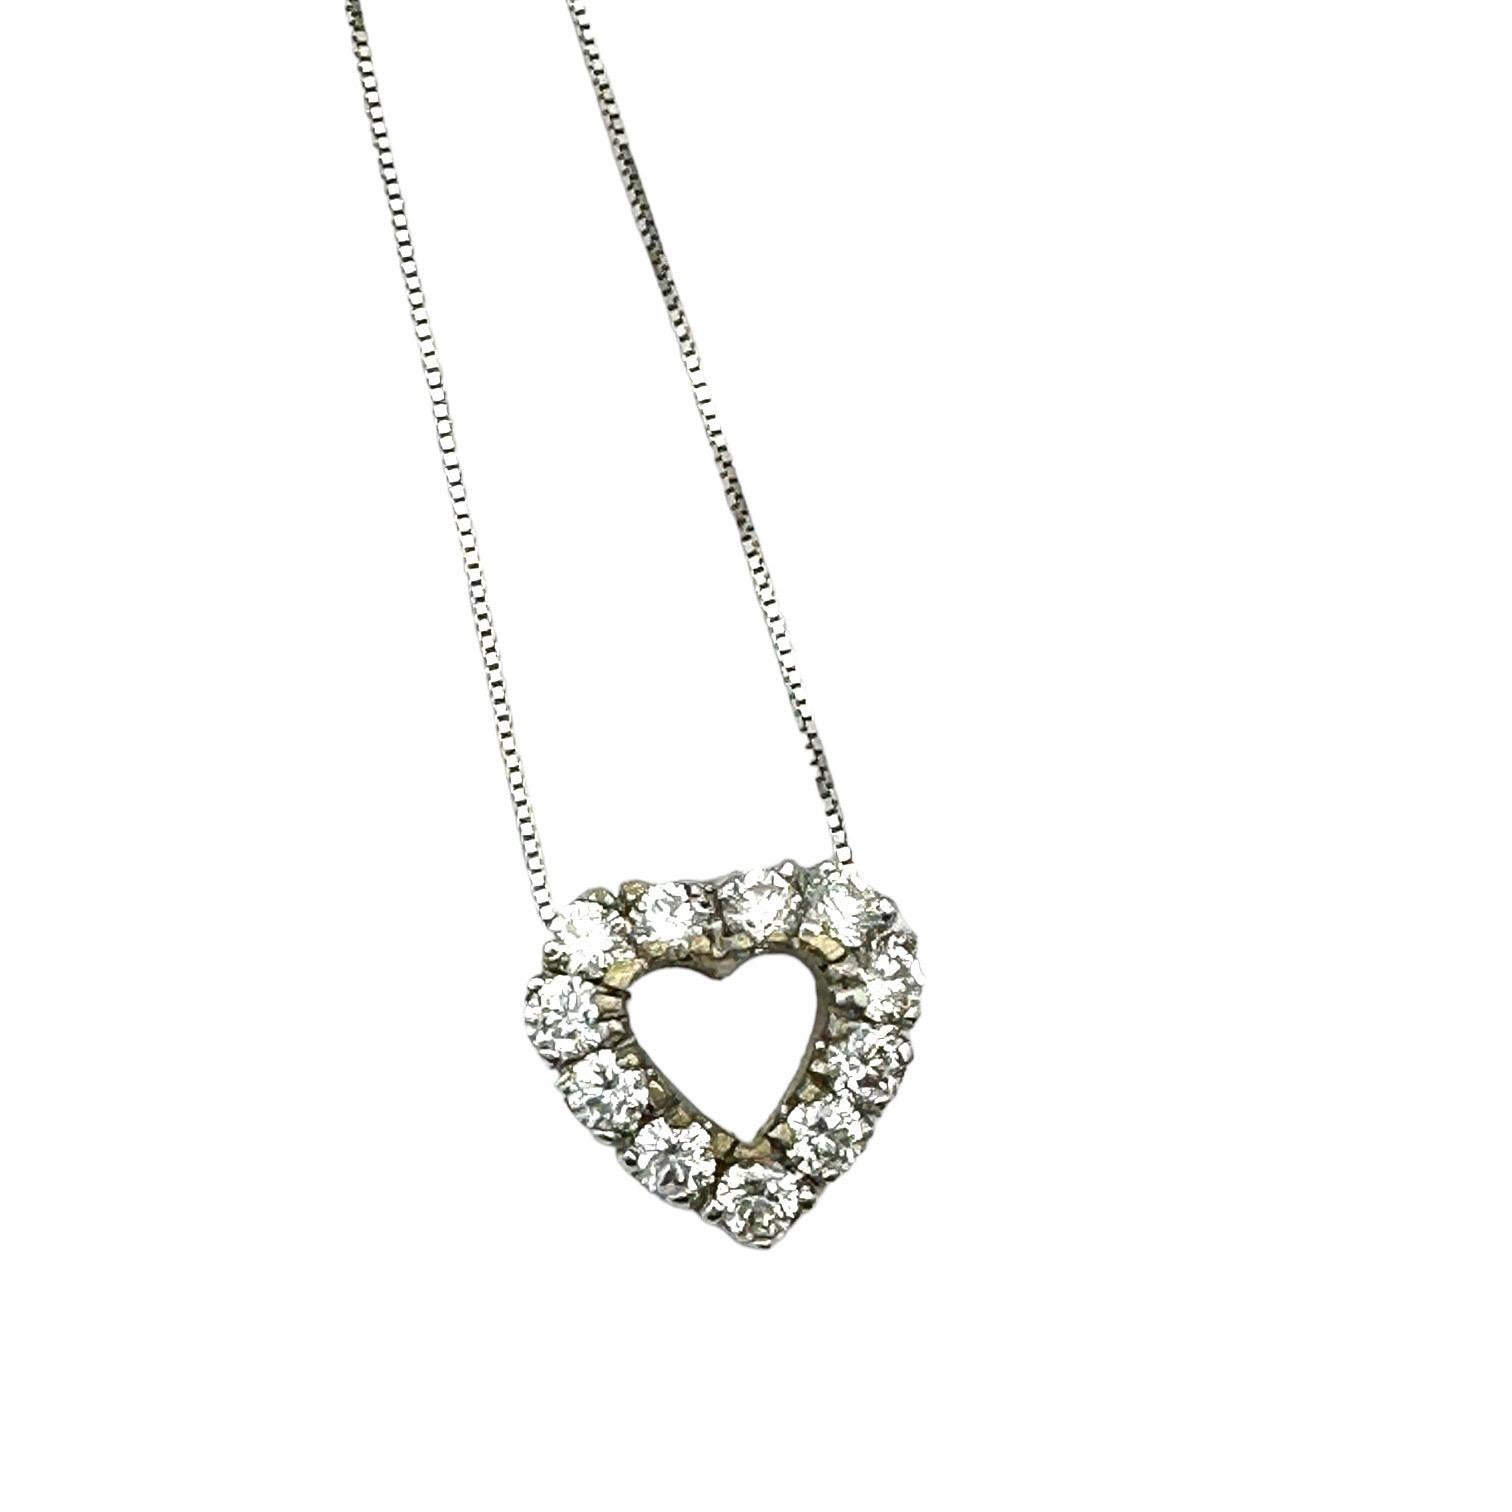 This stunning 1.75 Carat Diamond Heart Pendant and chain is crafted with 18K white gold and quality diamonds set in prong settings. The diamonds have an impressive VS-F/G grade, ensuring their remarkable sparkle and brilliance. A timeless symbol of